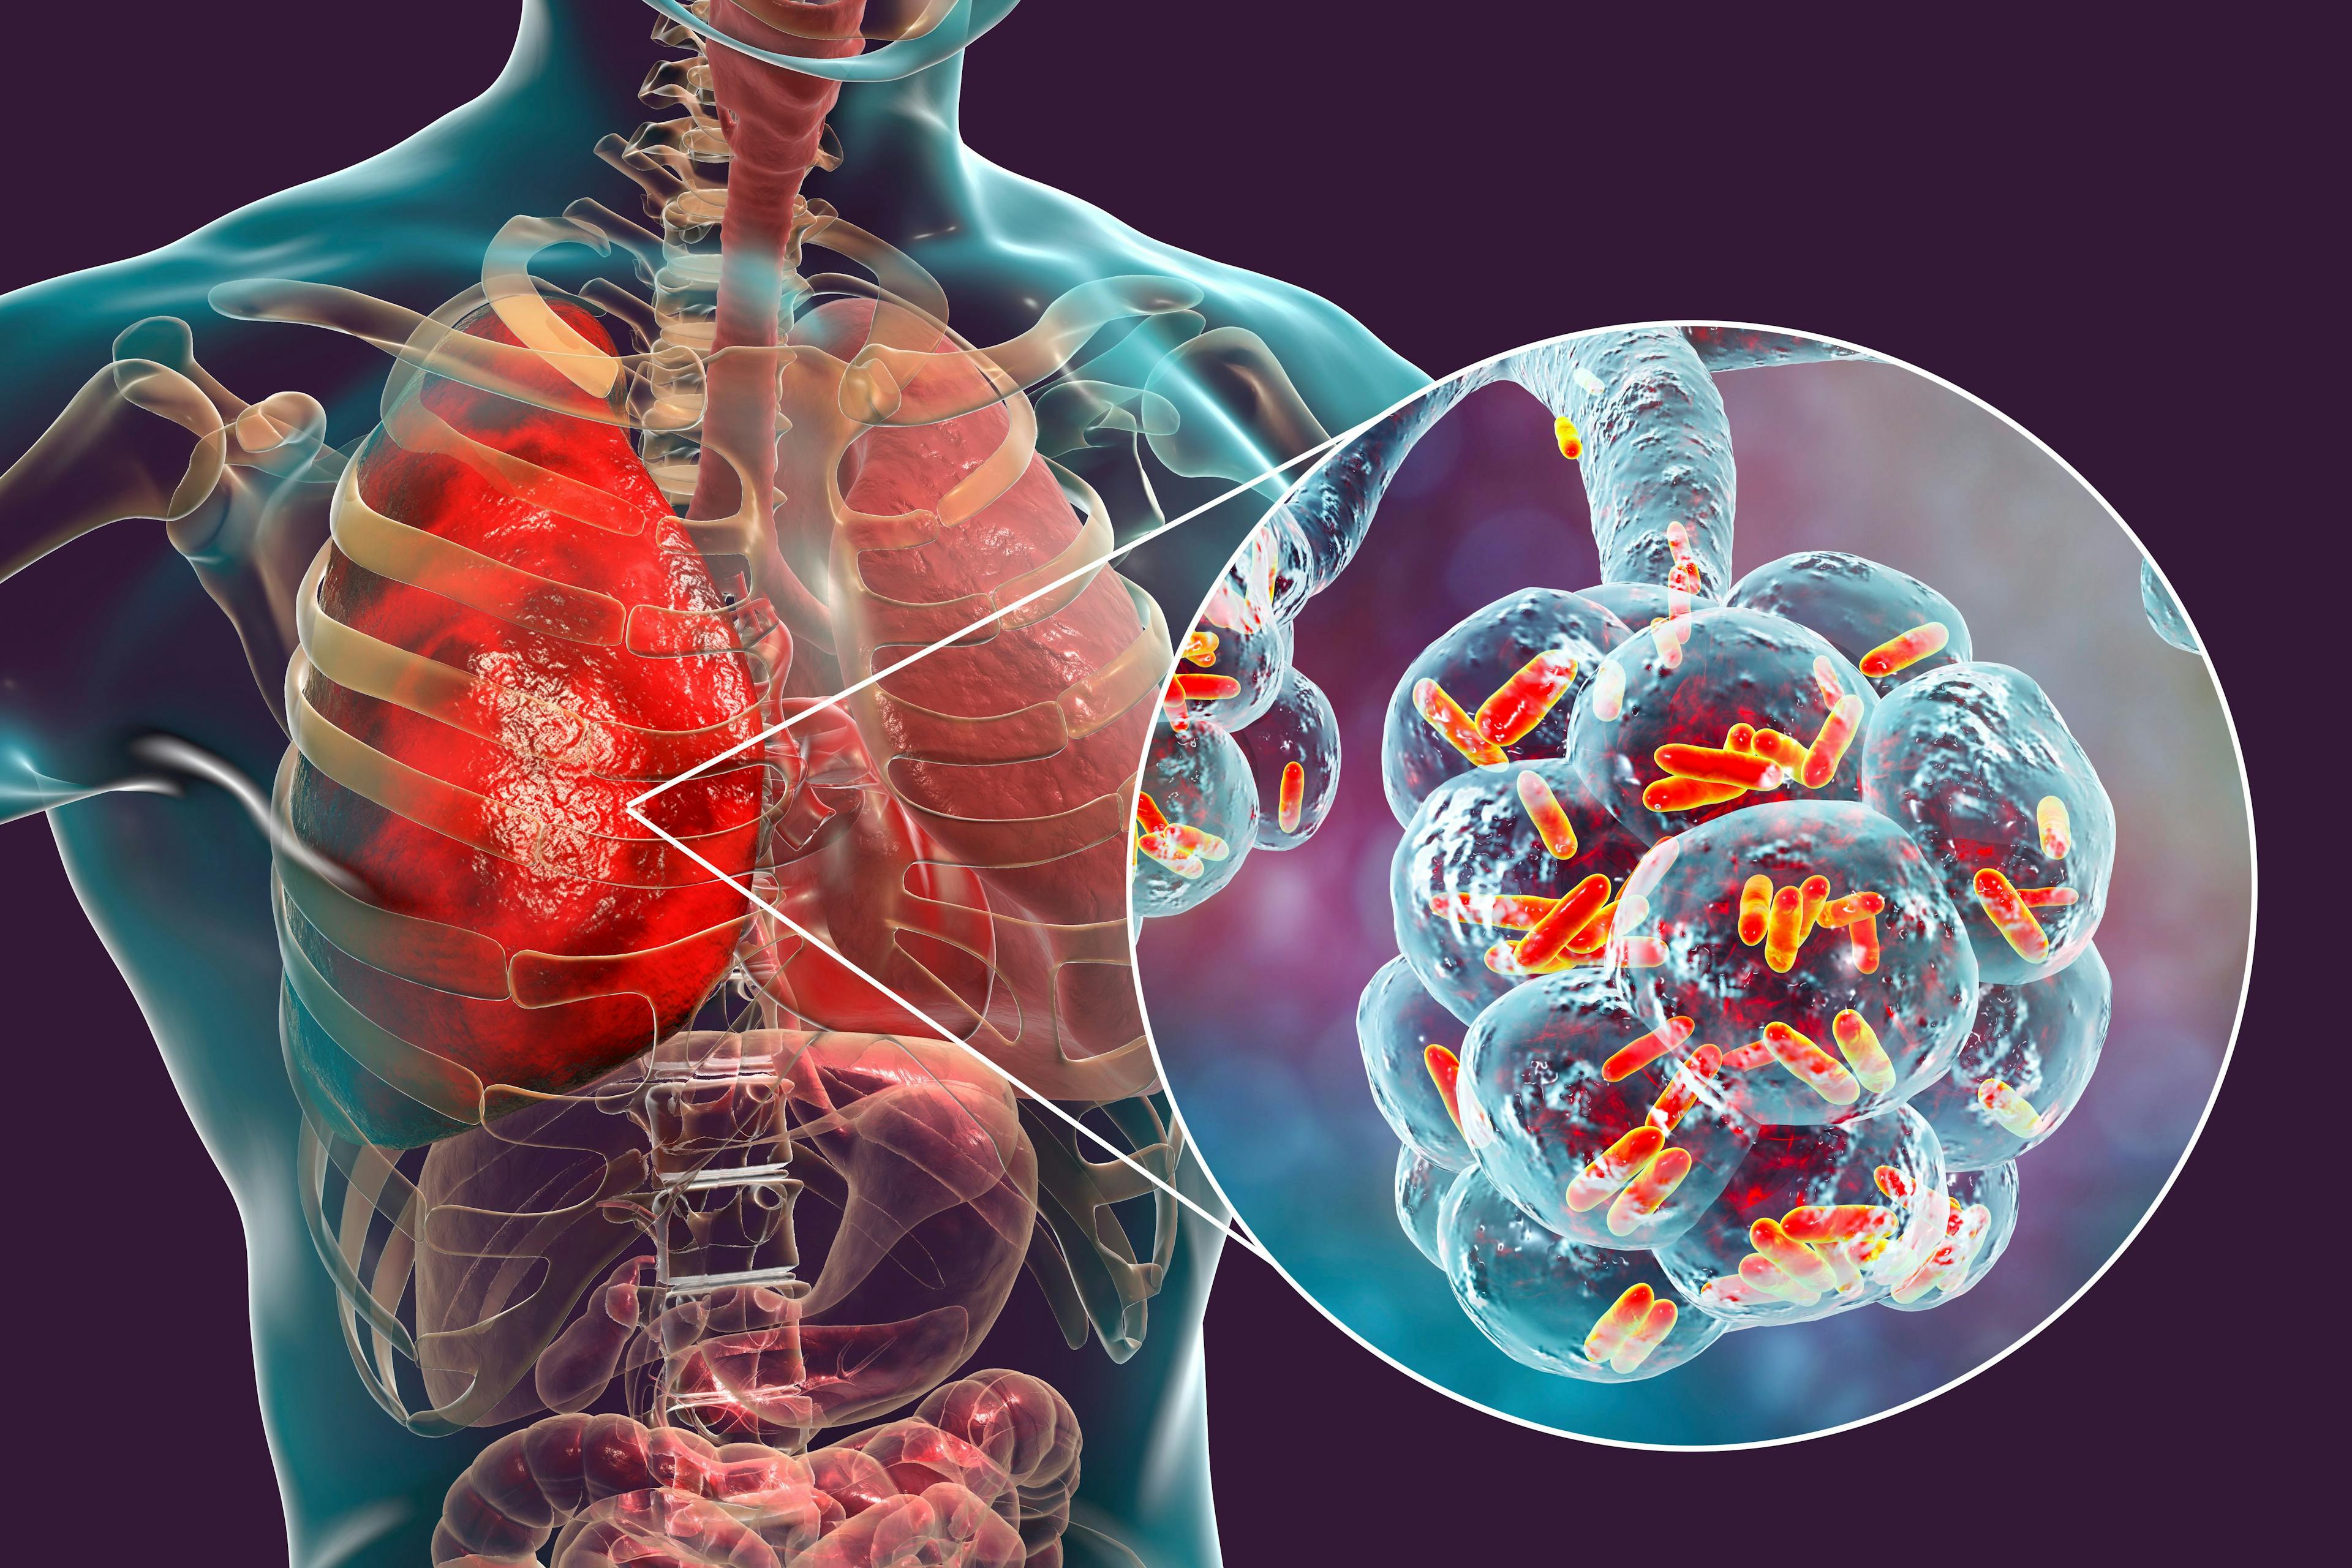 3D illustration showing rod-shaped bacteria inside alveoli of the lung | Image Credit: Dr_Microbe - stock.adobe.com